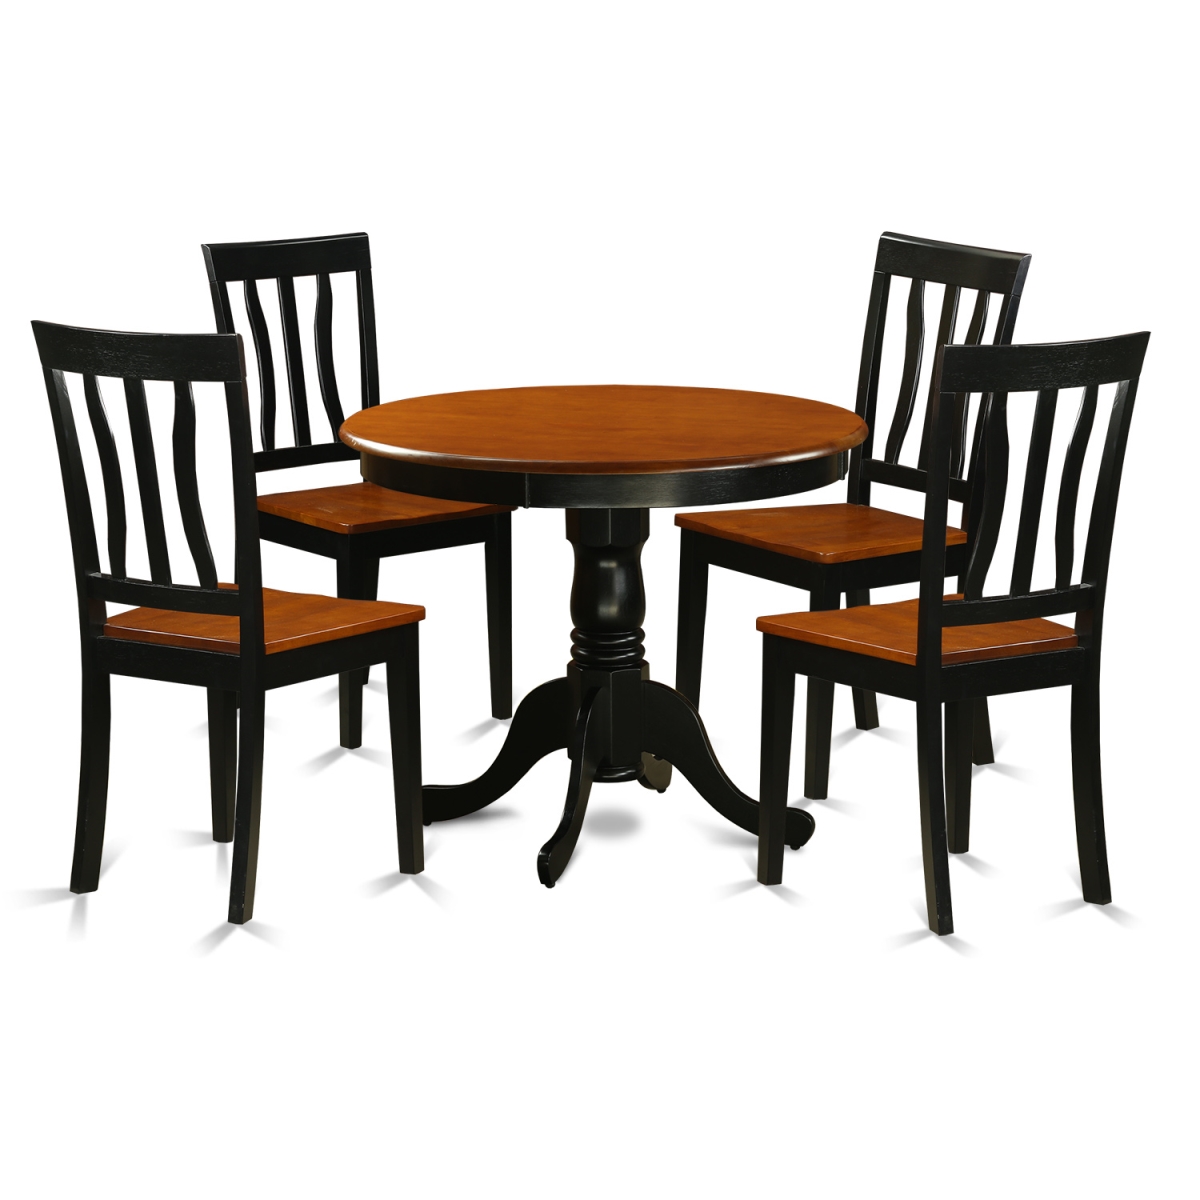 Picture of East West Furniture ANTI5-BLK-W Dining Set with 4 Solid Chairs, Black & Cherry - 5 Piece